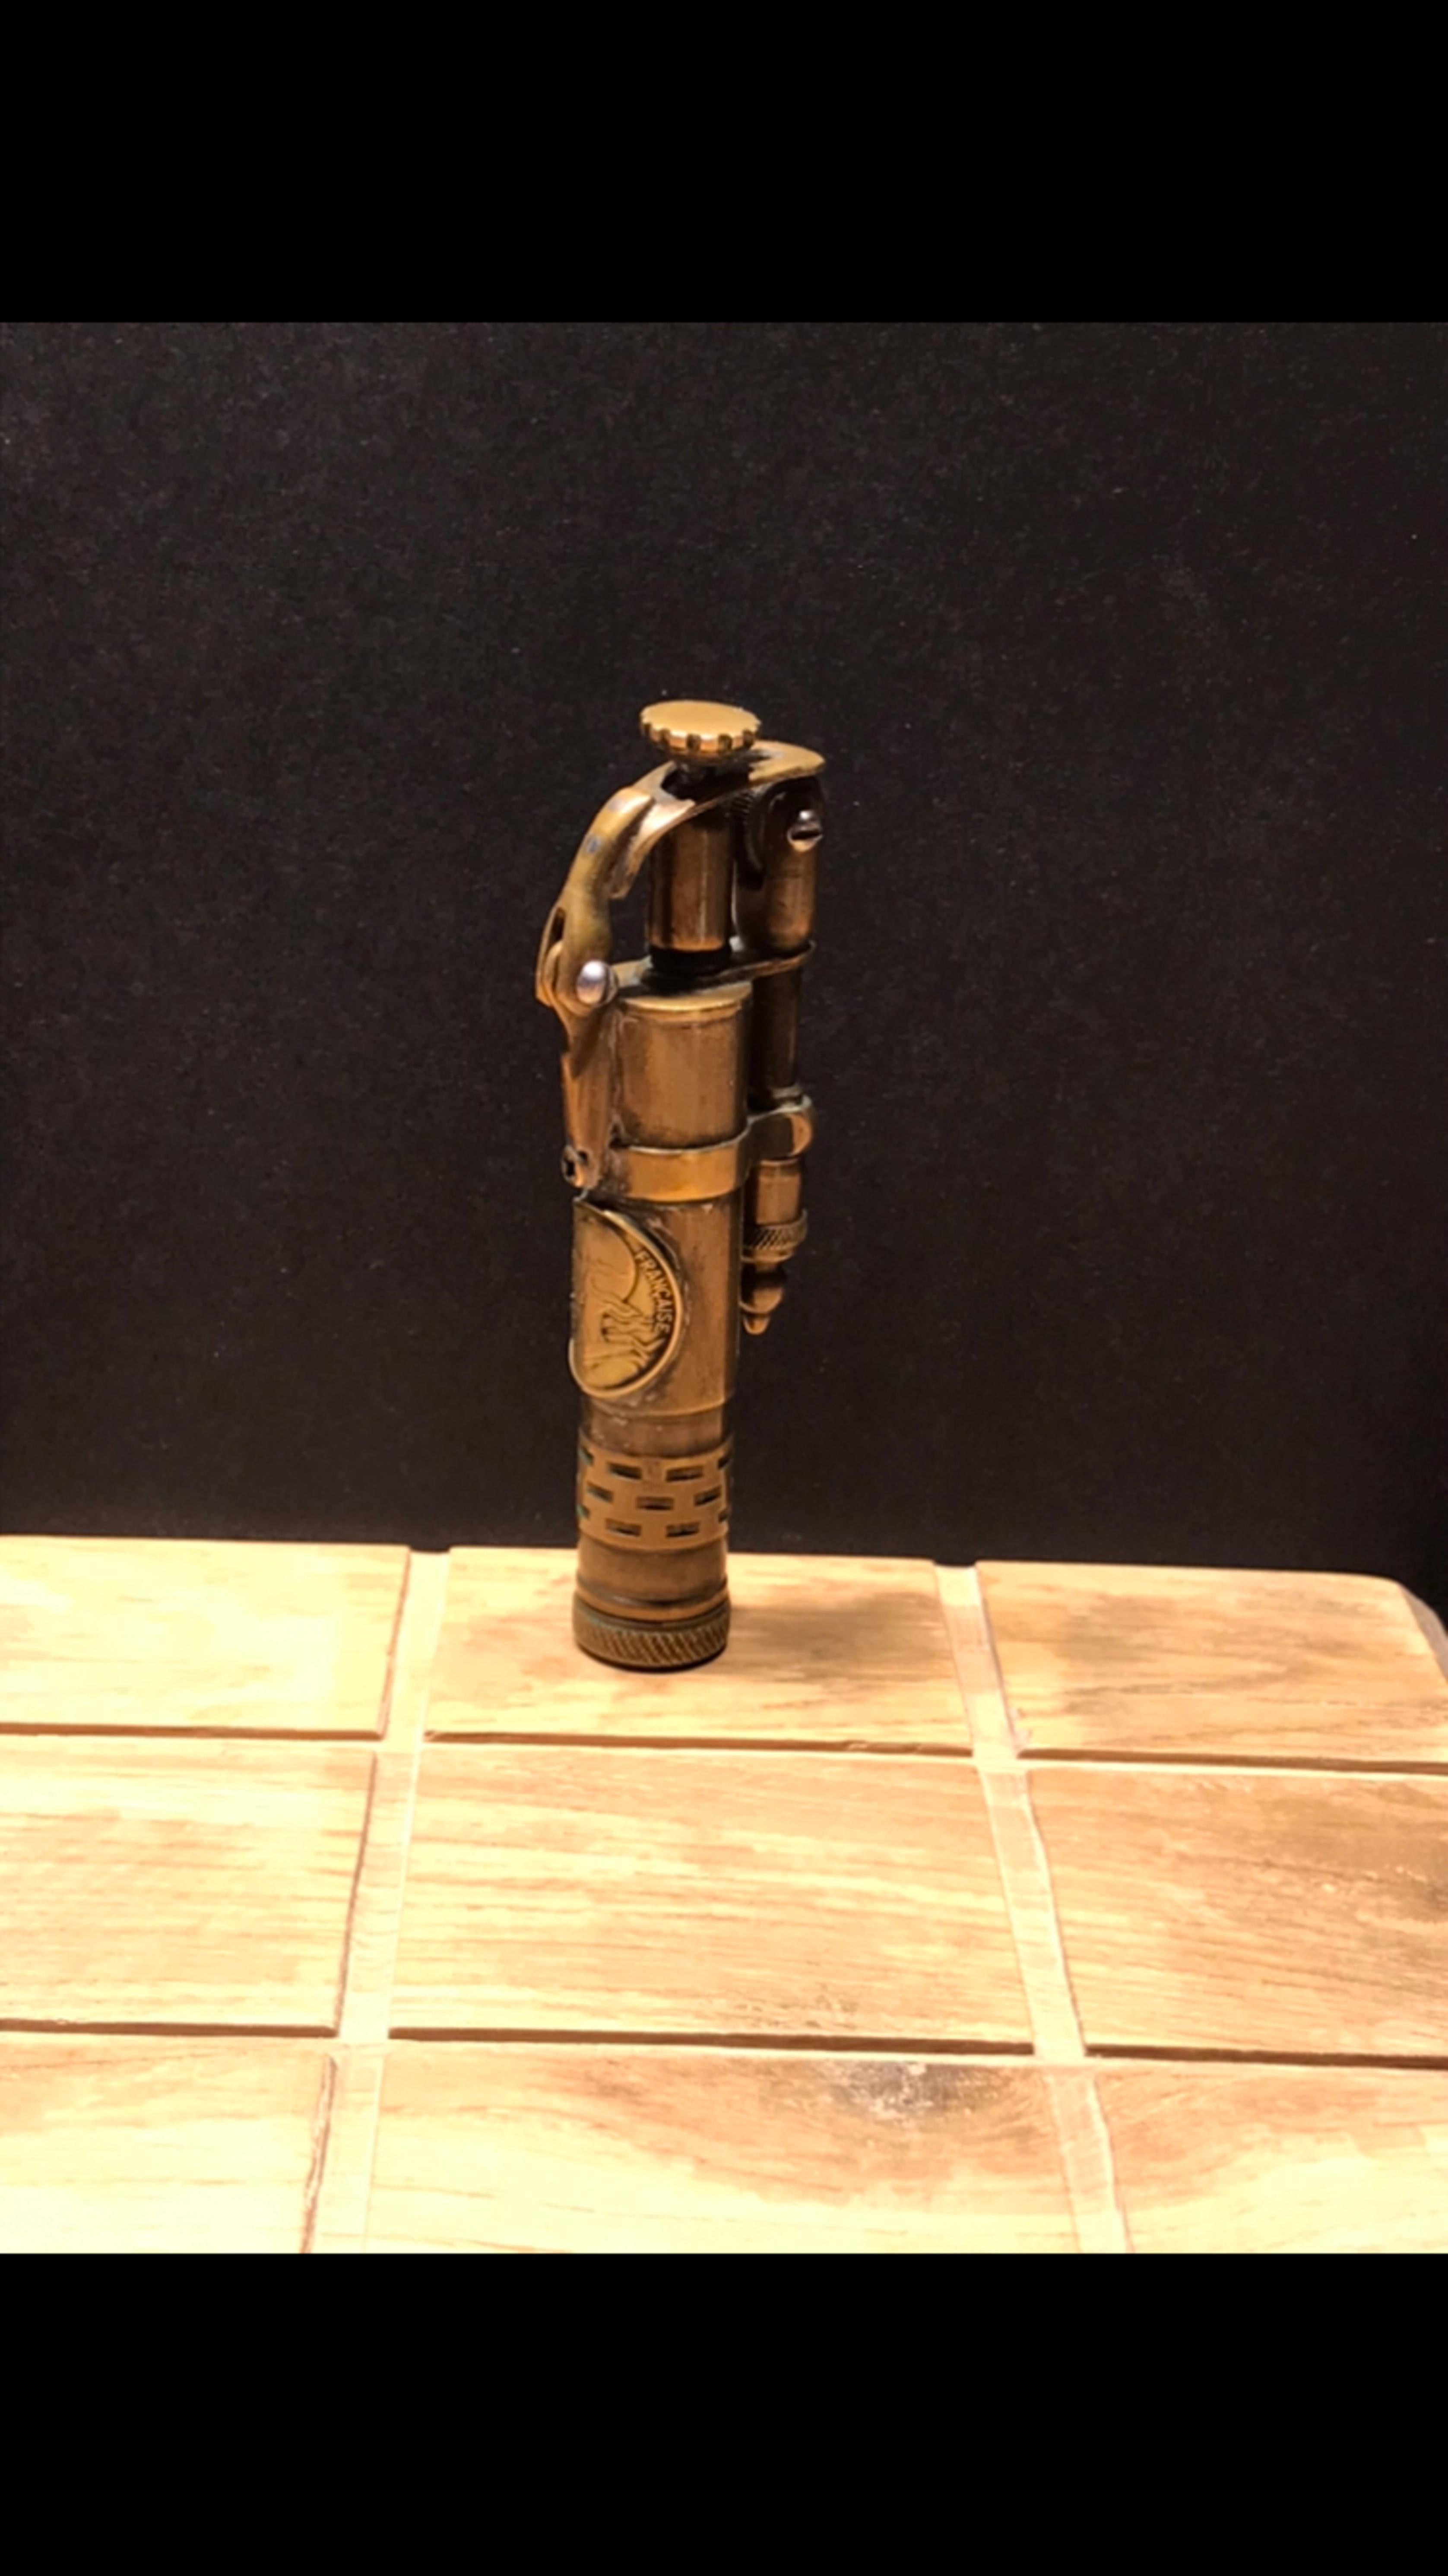 This handmade petrol lighter will be an excellent gift for yourself or your loved ones, the lighter is compact in size and does not take up much space